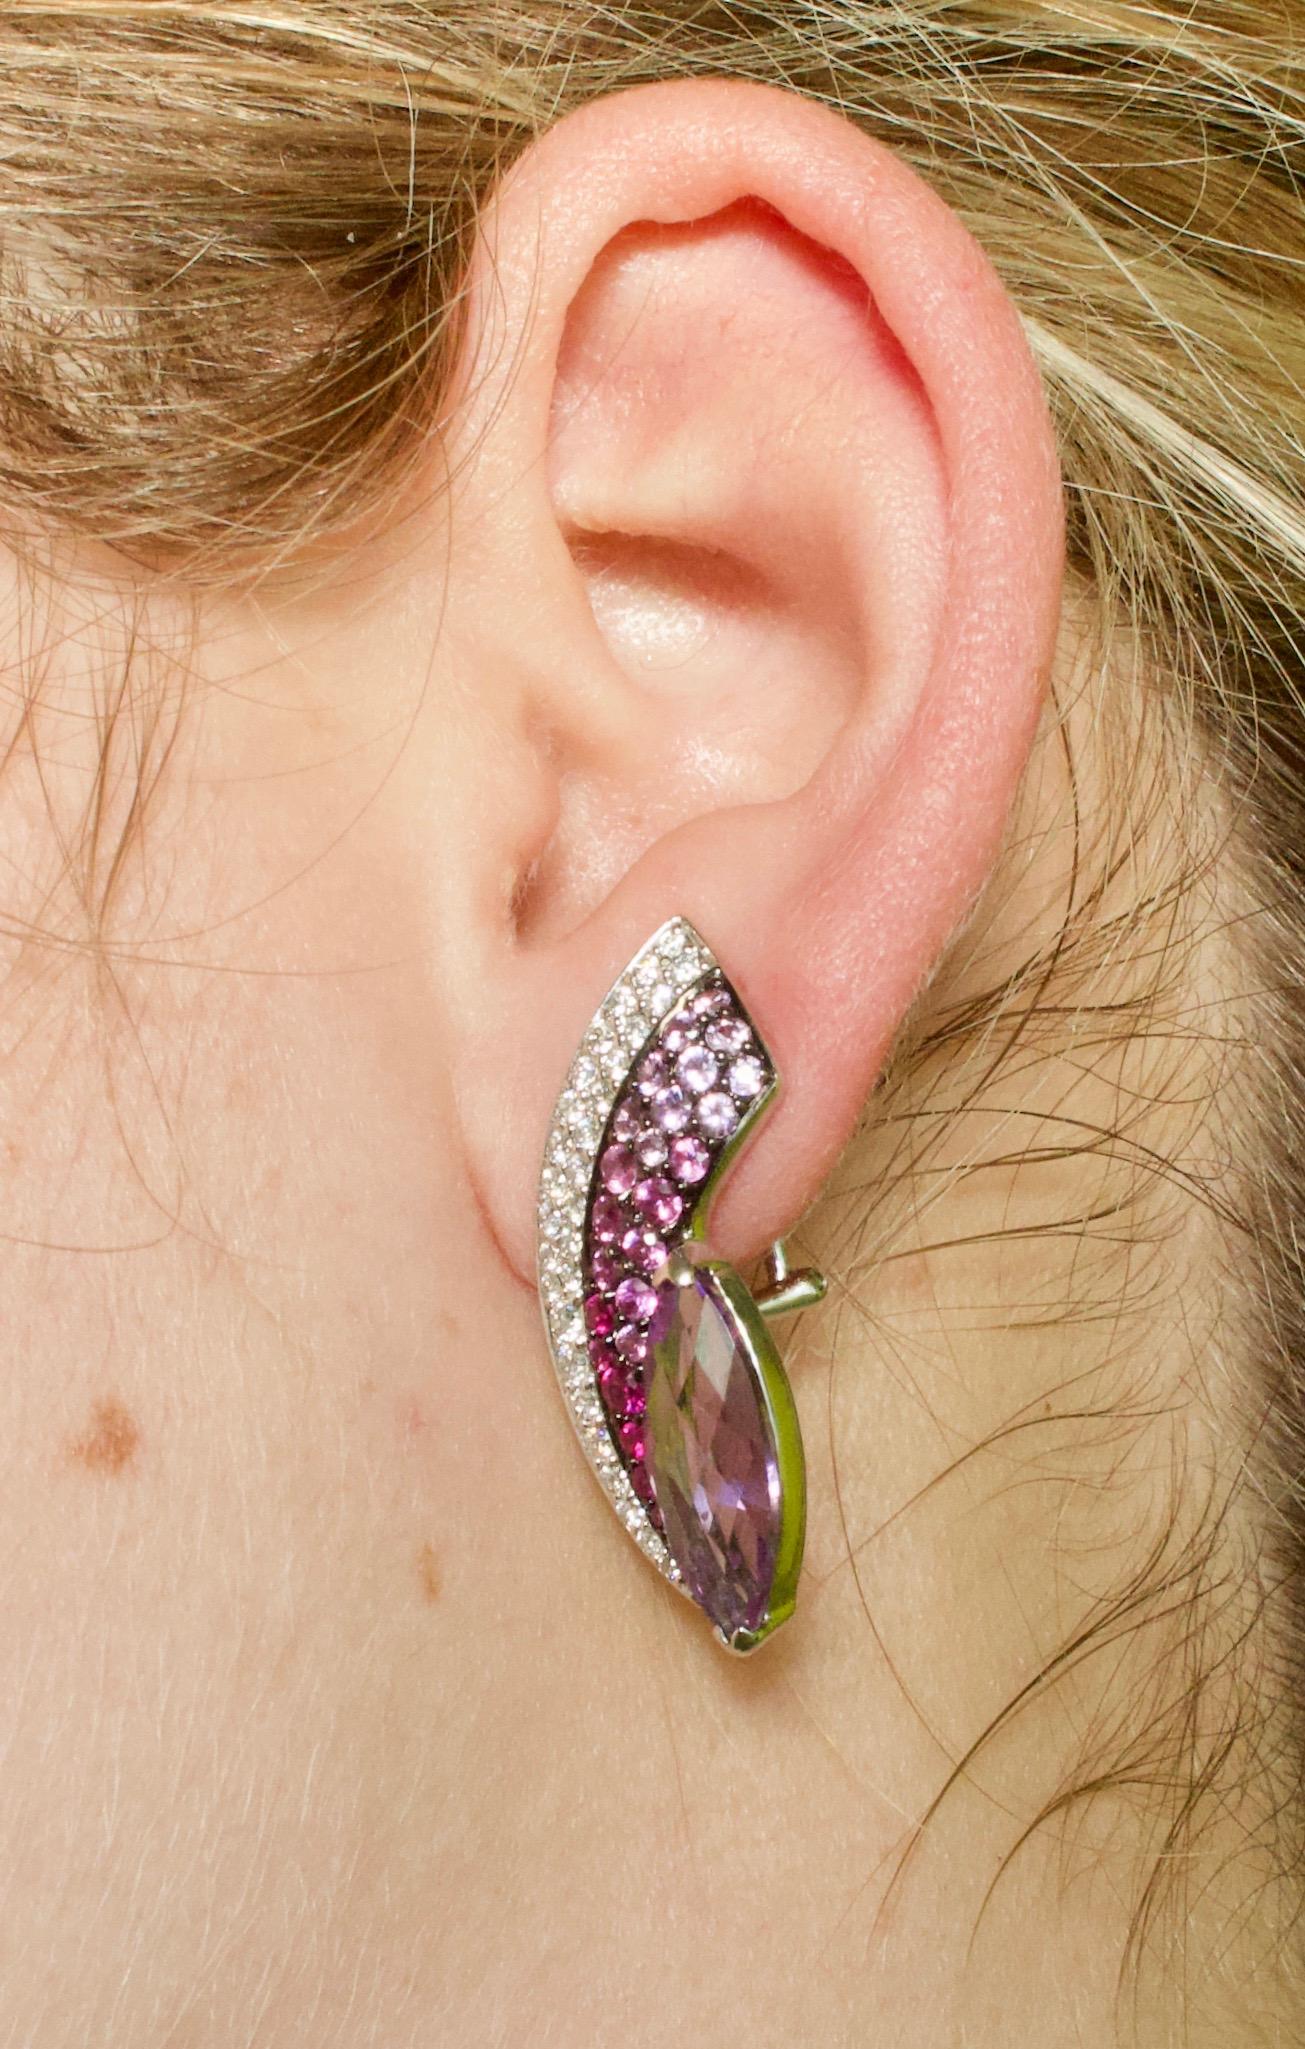 Slimming Amethyst Pink Sapphire and Diamond Earrings in 18 Karat In New Condition For Sale In Wailea, HI